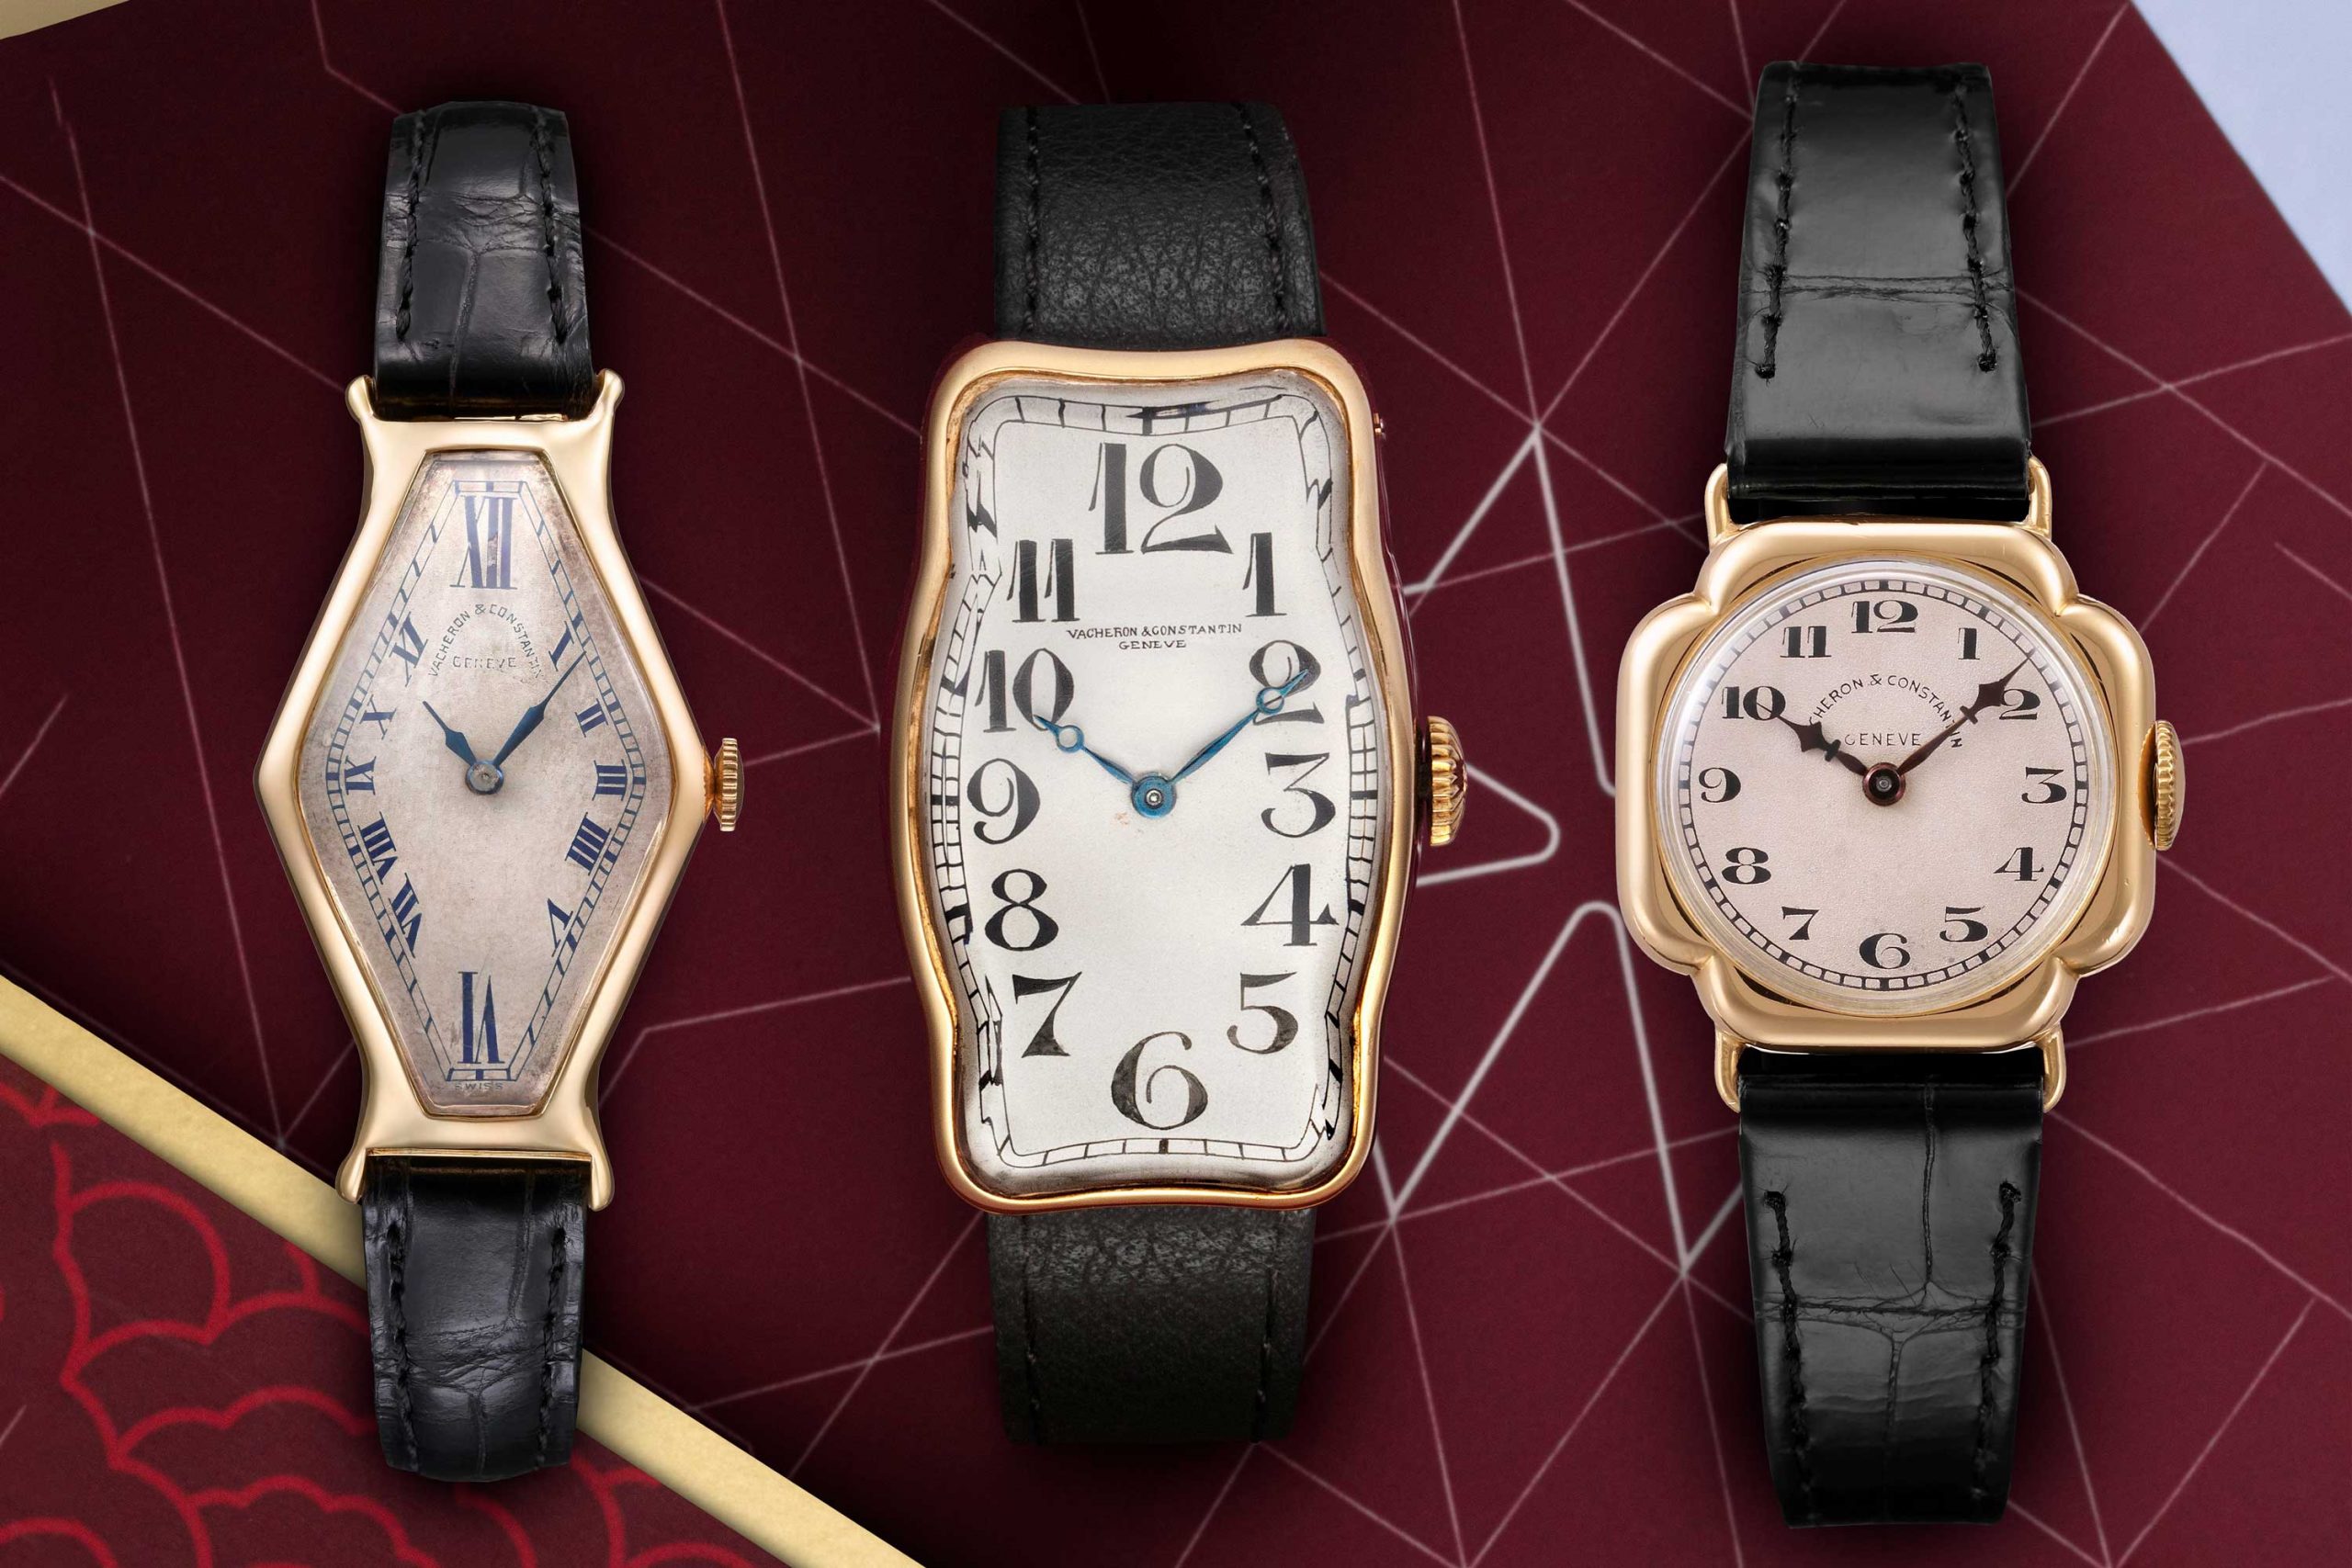 A Retrospective on Shaped Watches